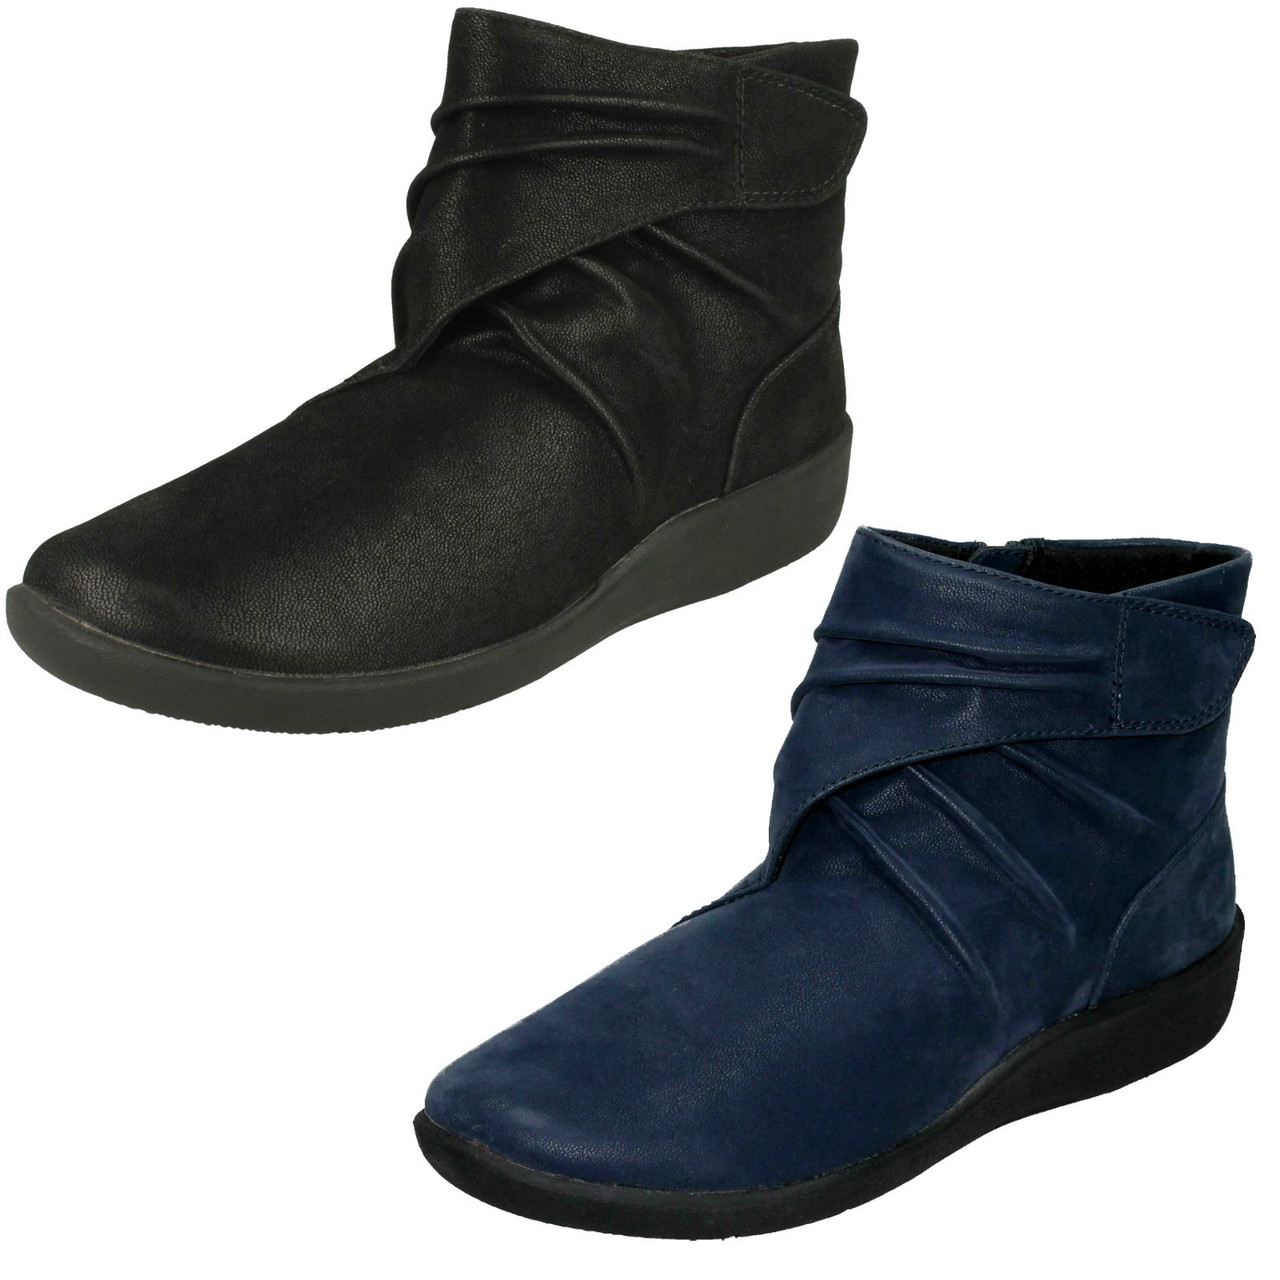 Ladies Clarks Cloud Steppers Sillian